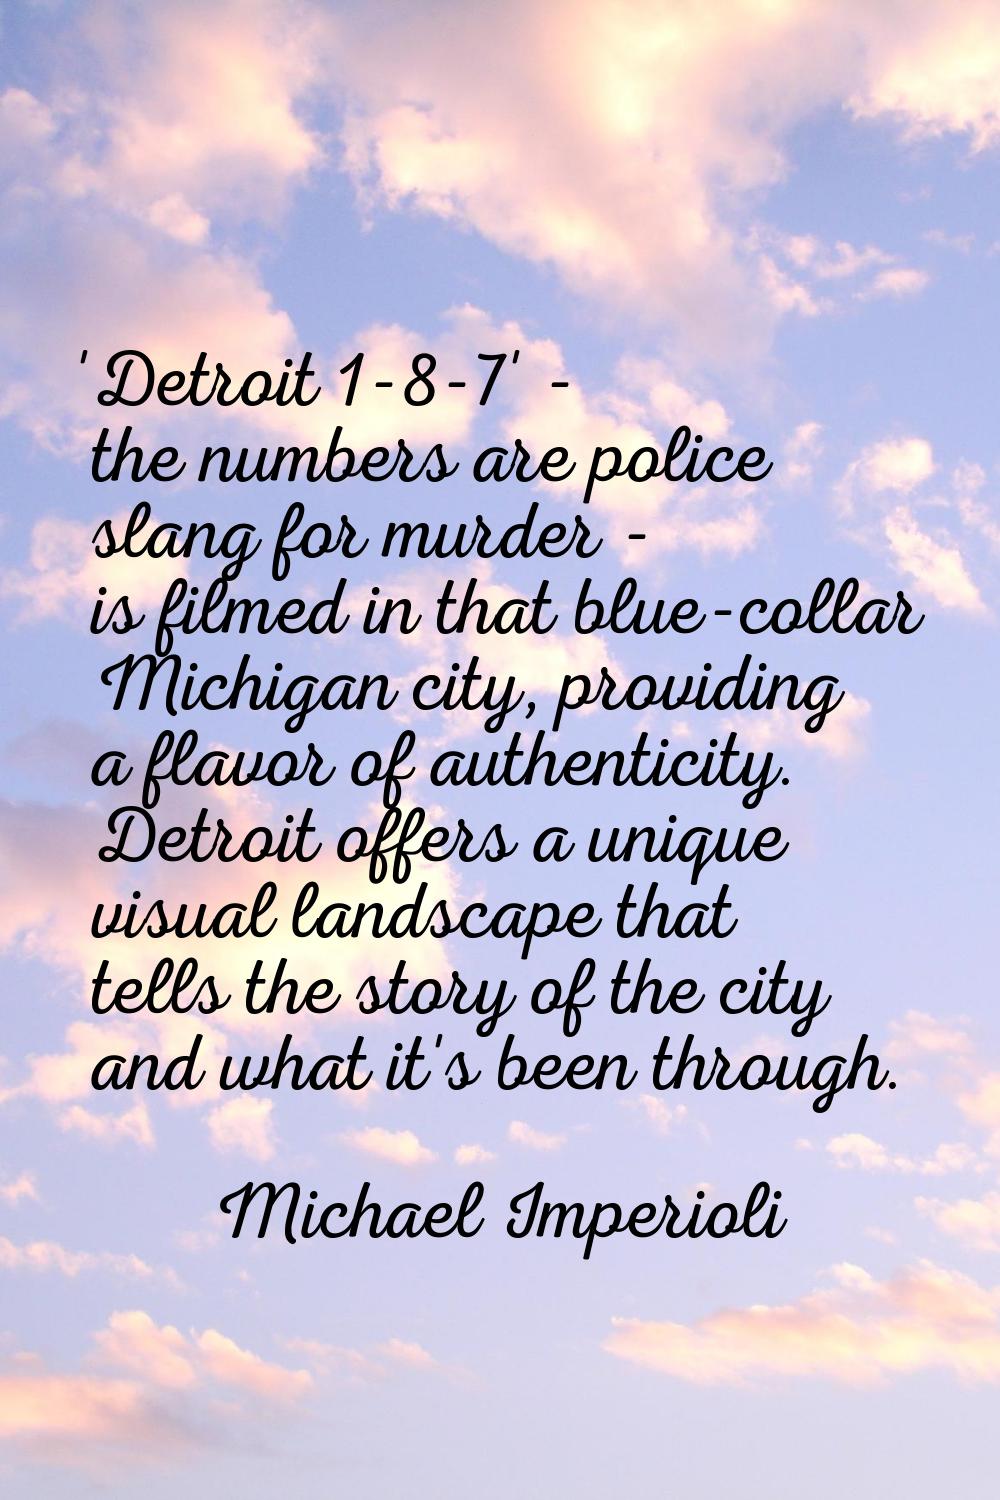 'Detroit 1-8-7' - the numbers are police slang for murder - is filmed in that blue-collar Michigan 